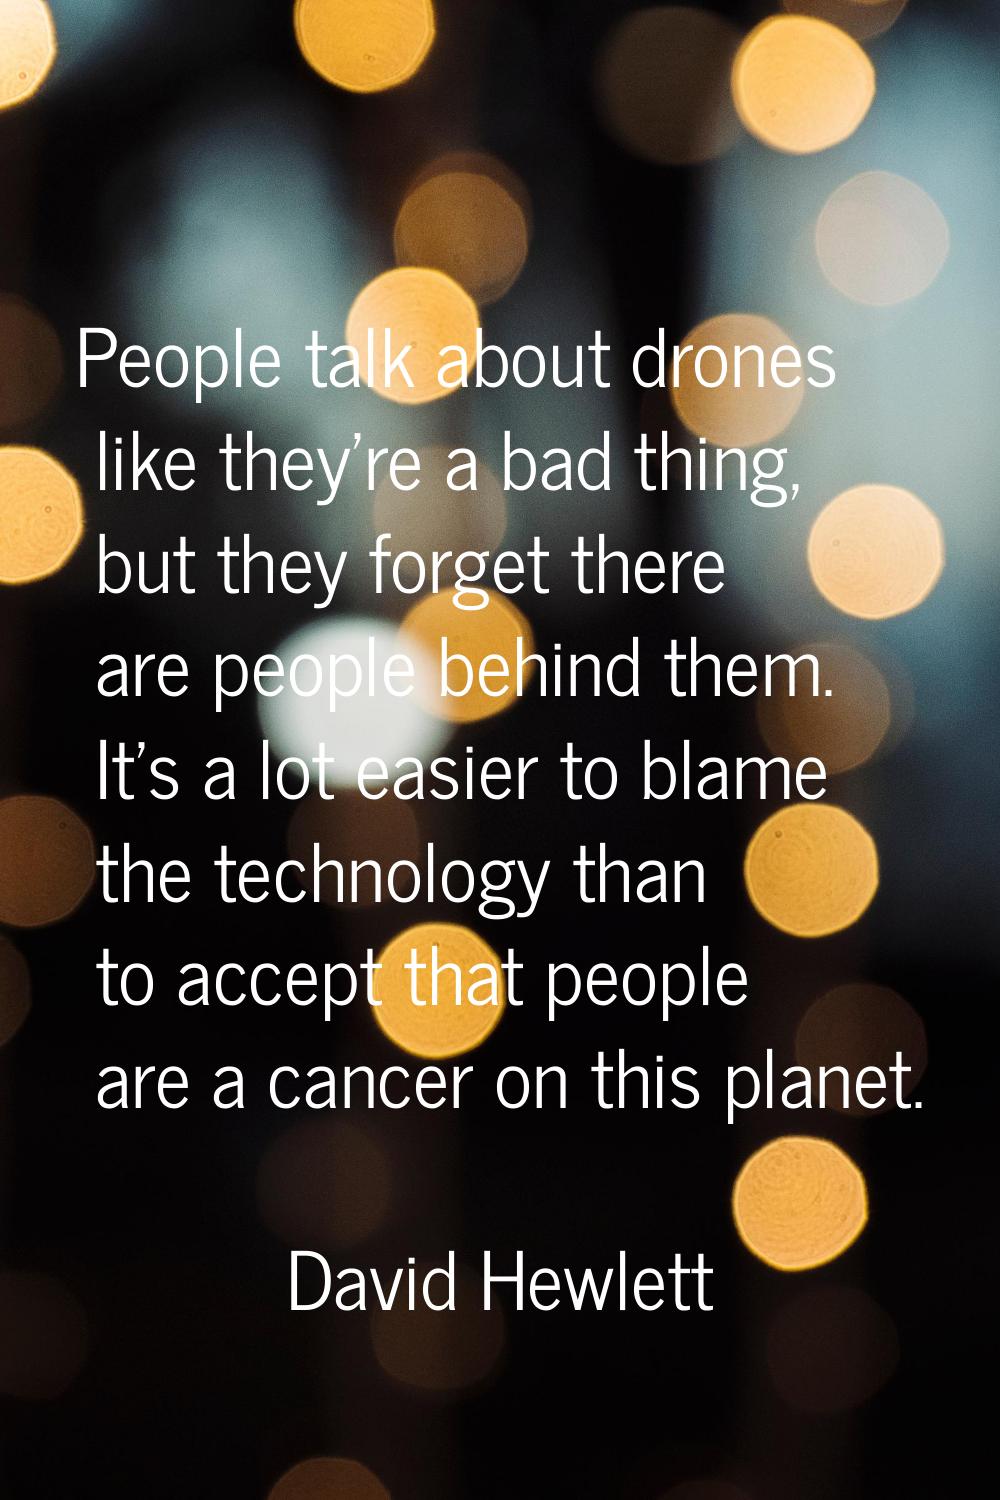 People talk about drones like they're a bad thing, but they forget there are people behind them. It